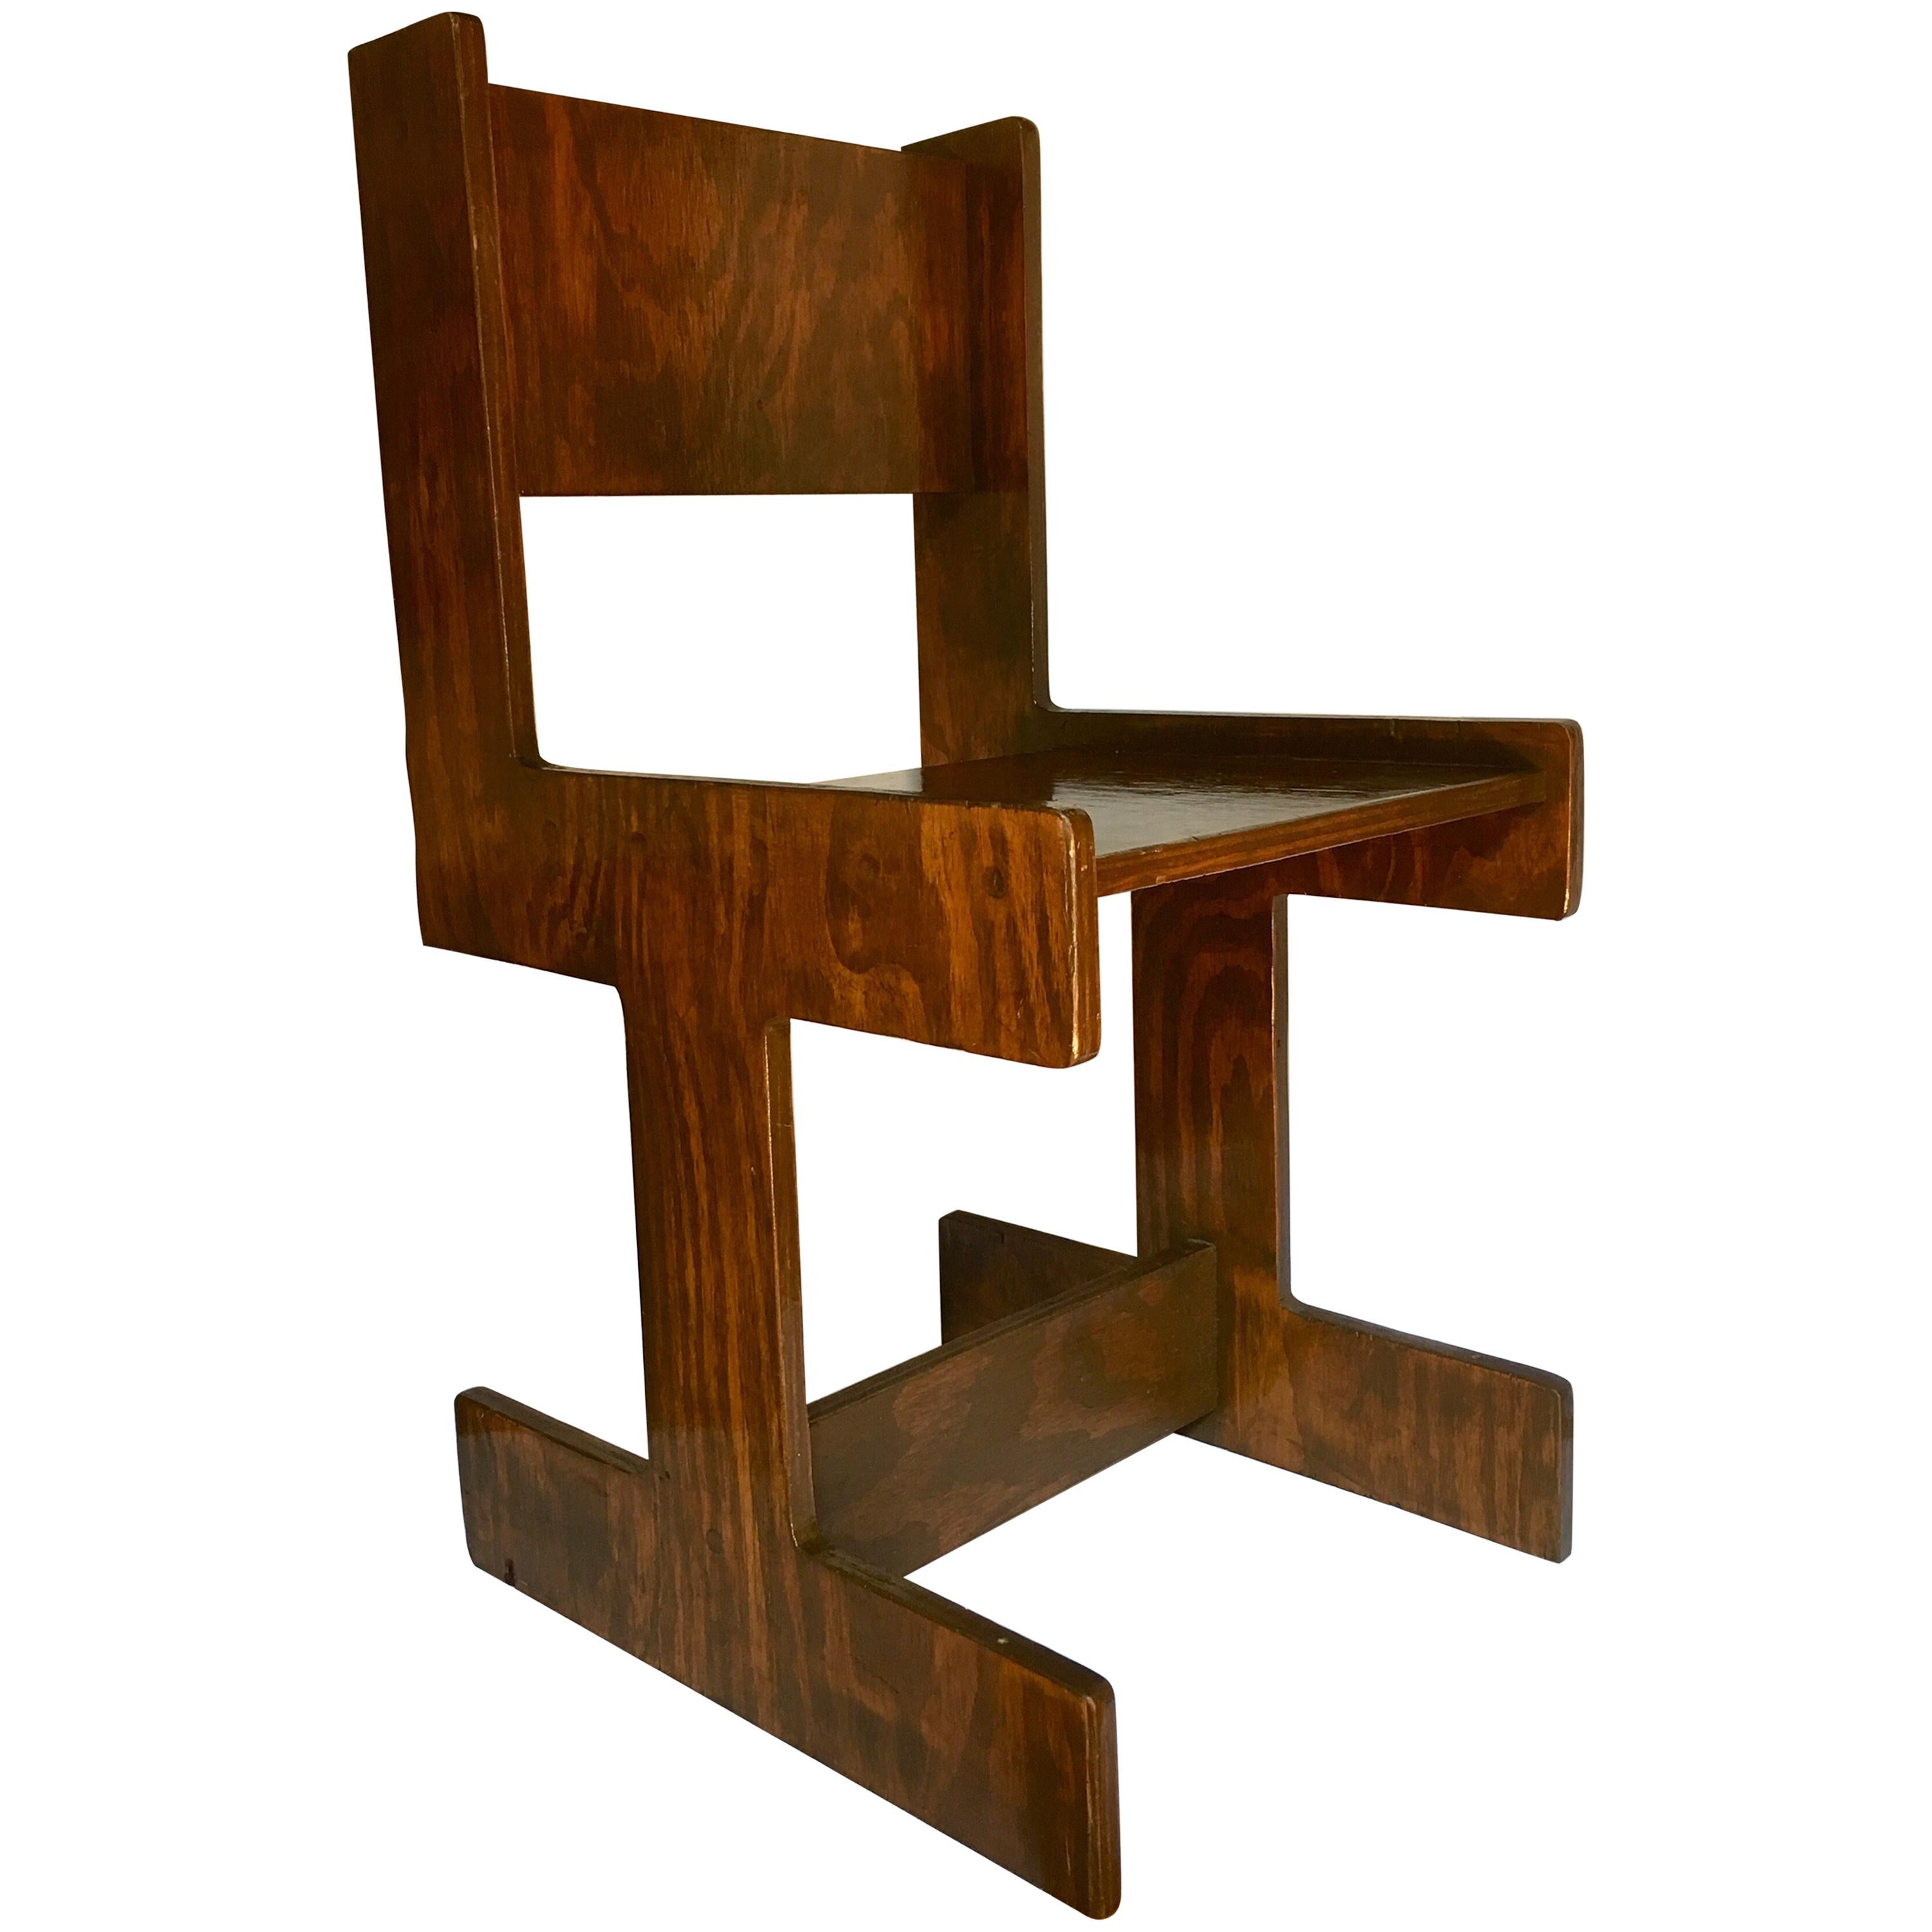 Mid-Century Modern Studio Crafted Cubist Wood Accent Chair